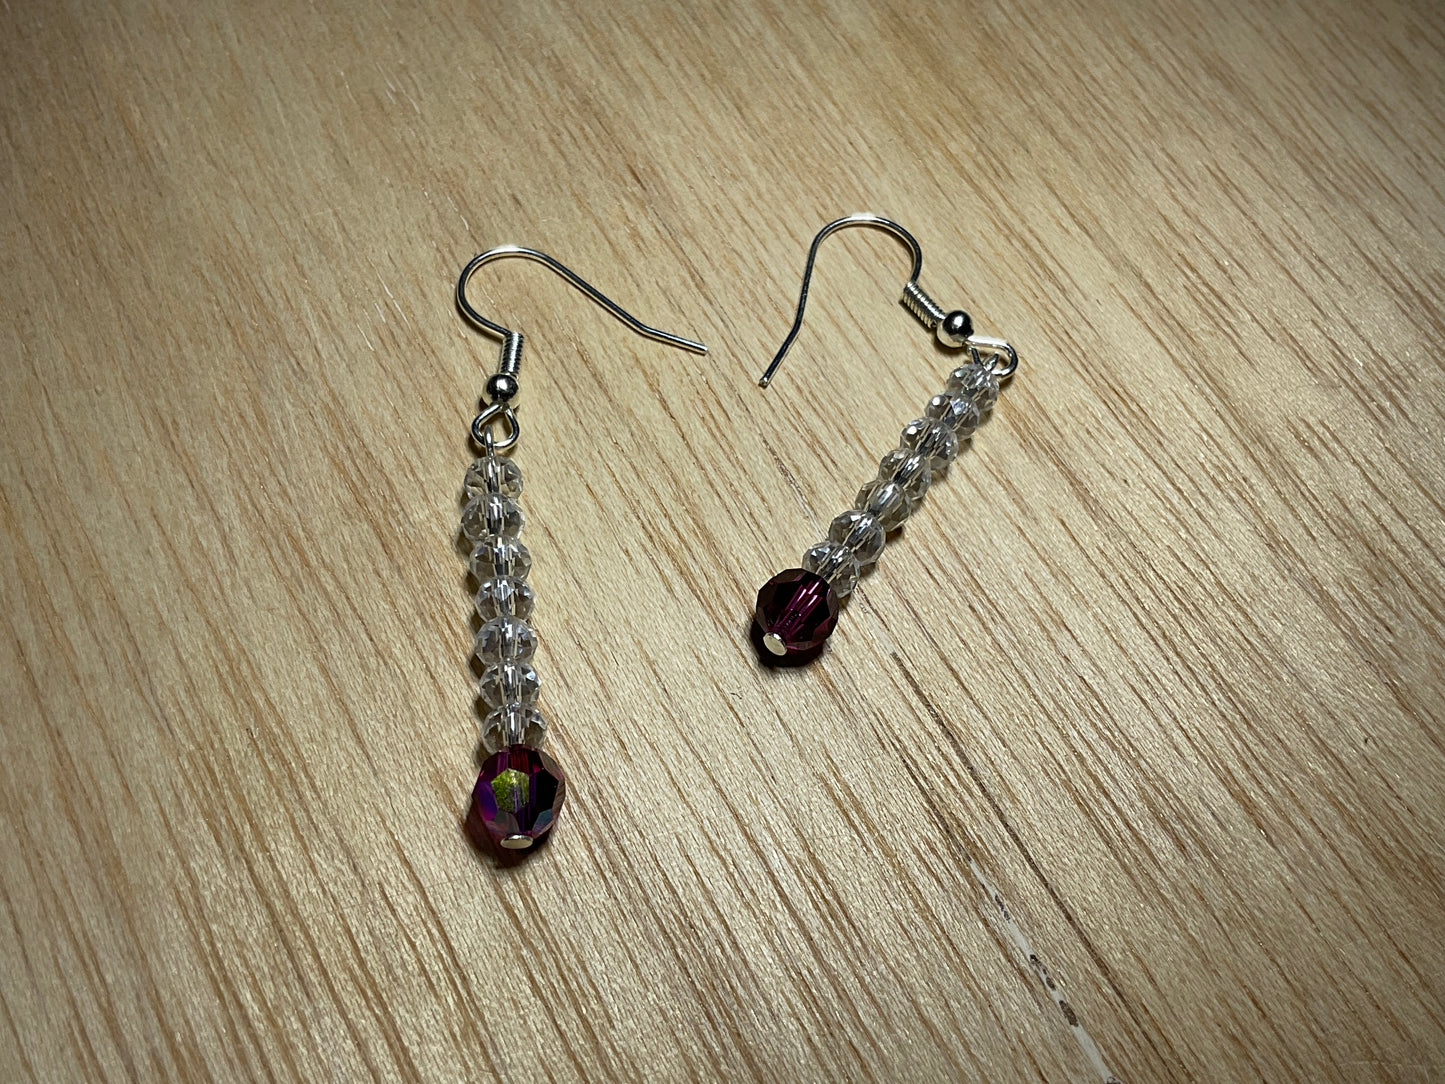 Swarovski Crystal and Glass Spacer Earrings